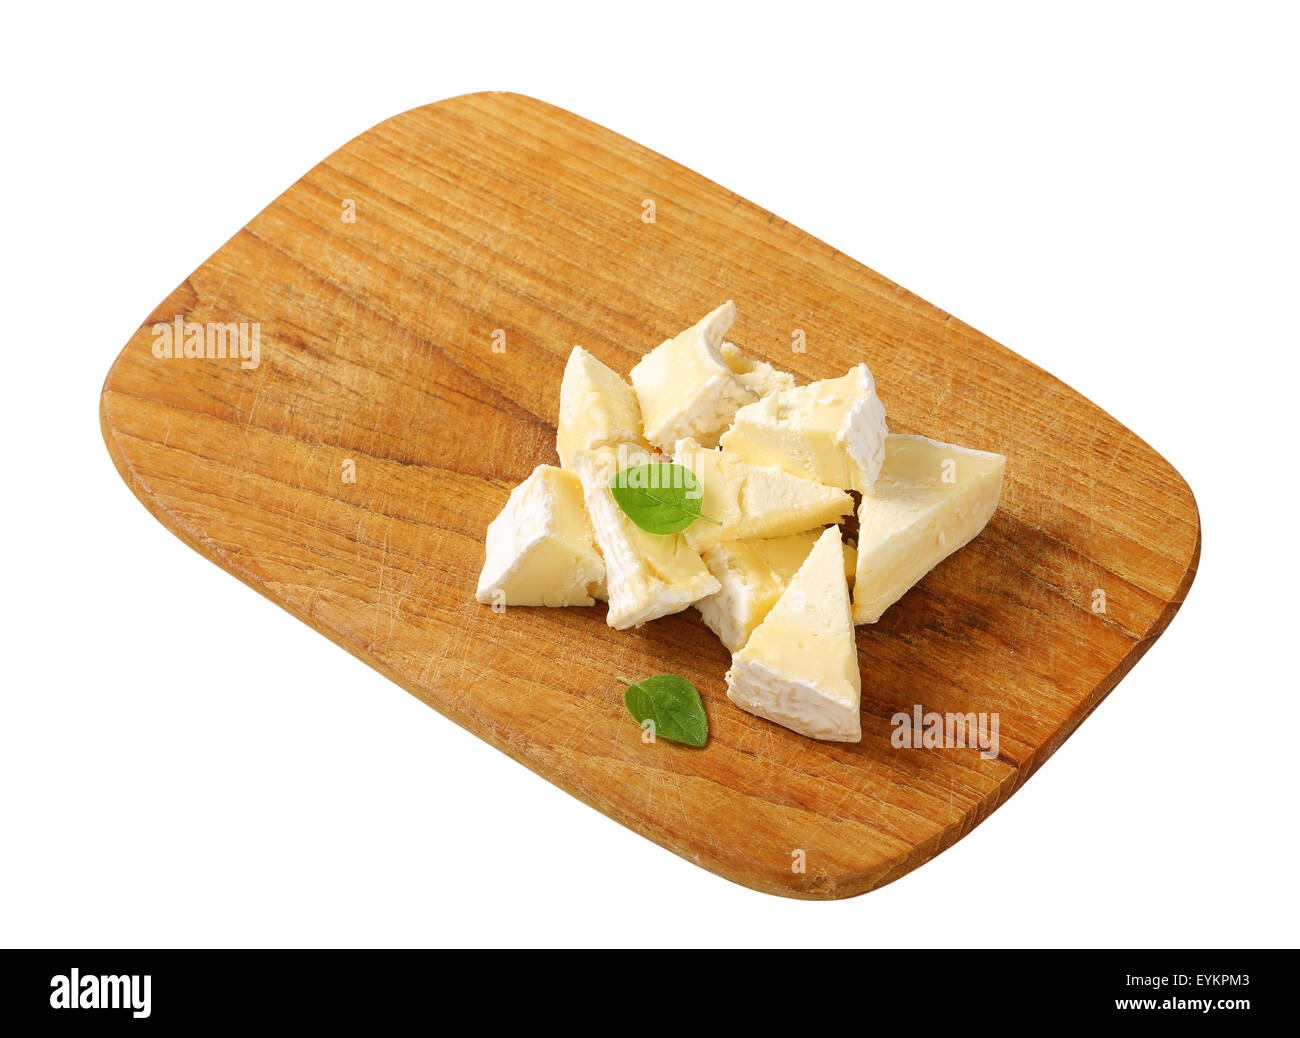 Pieces of French white rind cheese Stock Photo